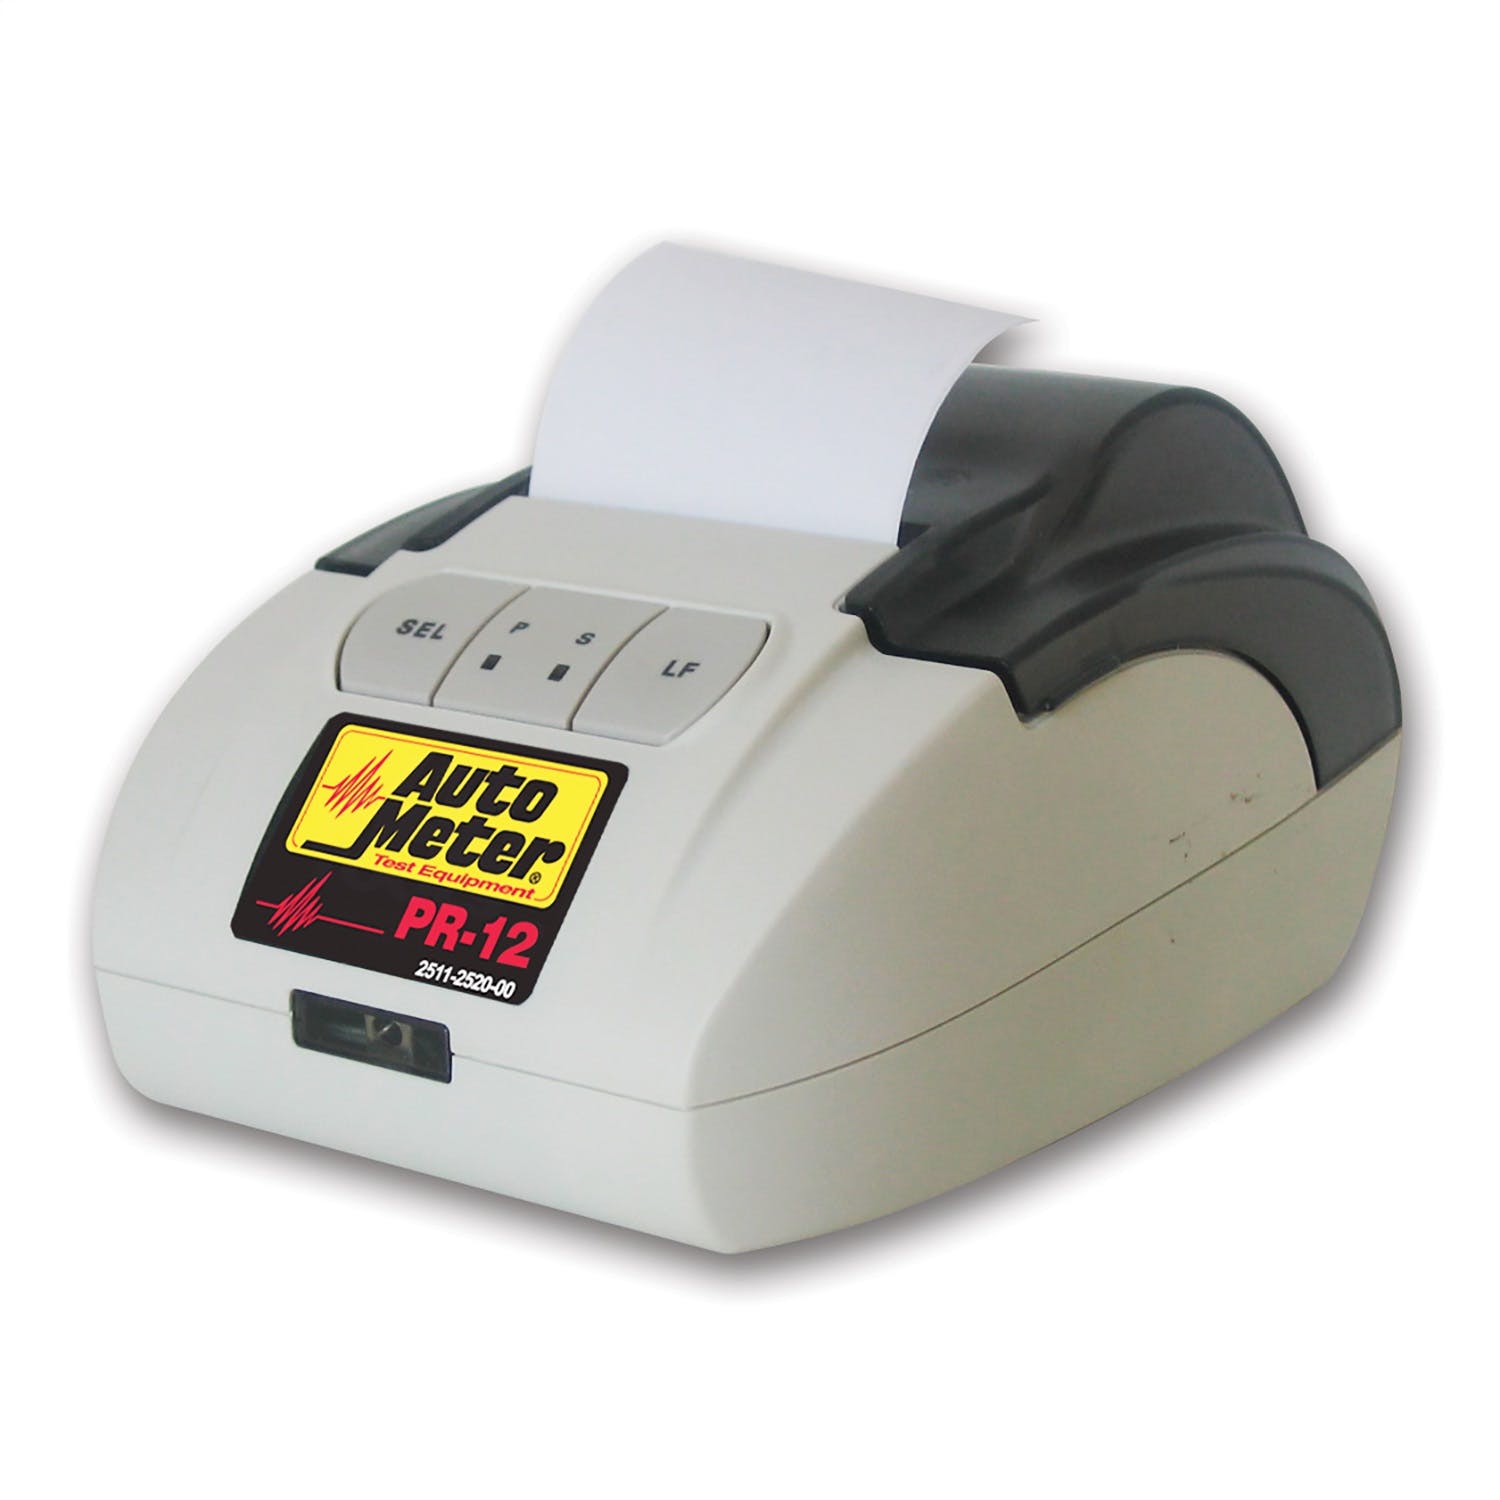 AutoMeter Products PR-12 Infrared External Printer